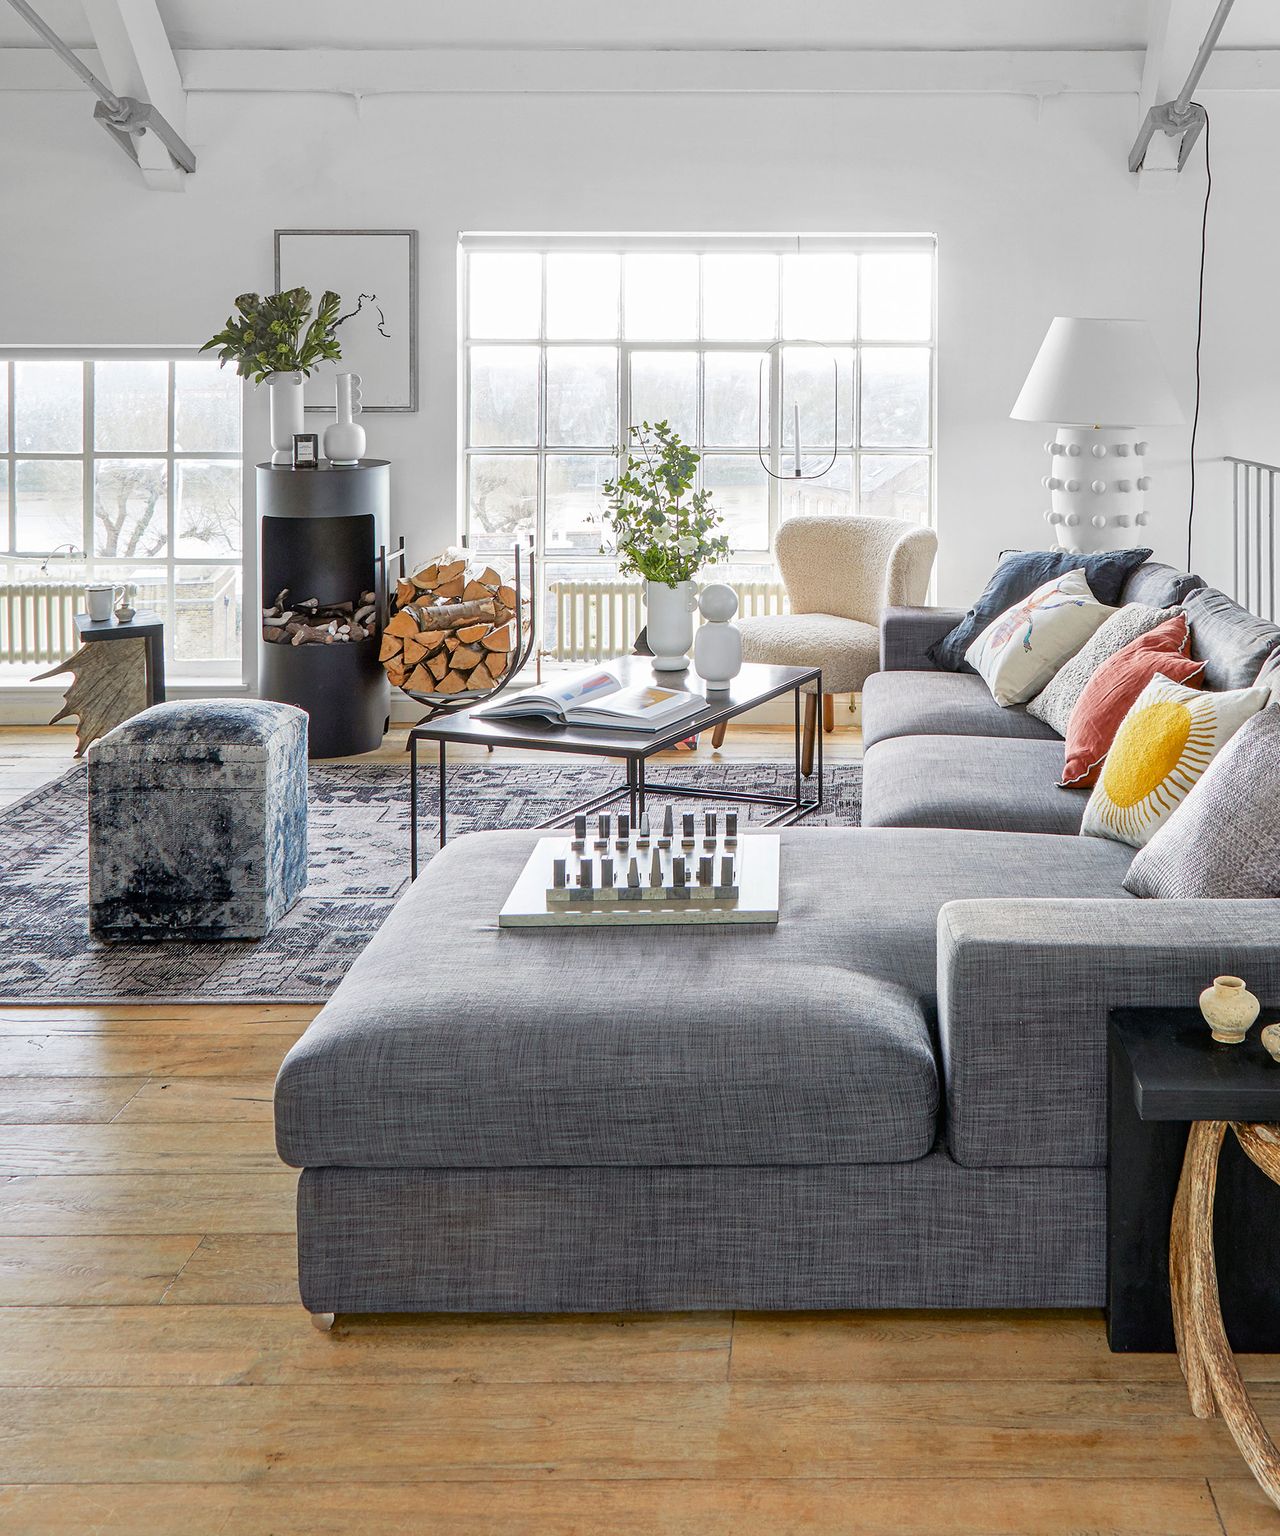 10 living room sofa ideas – the essential design rules for sofa layouts